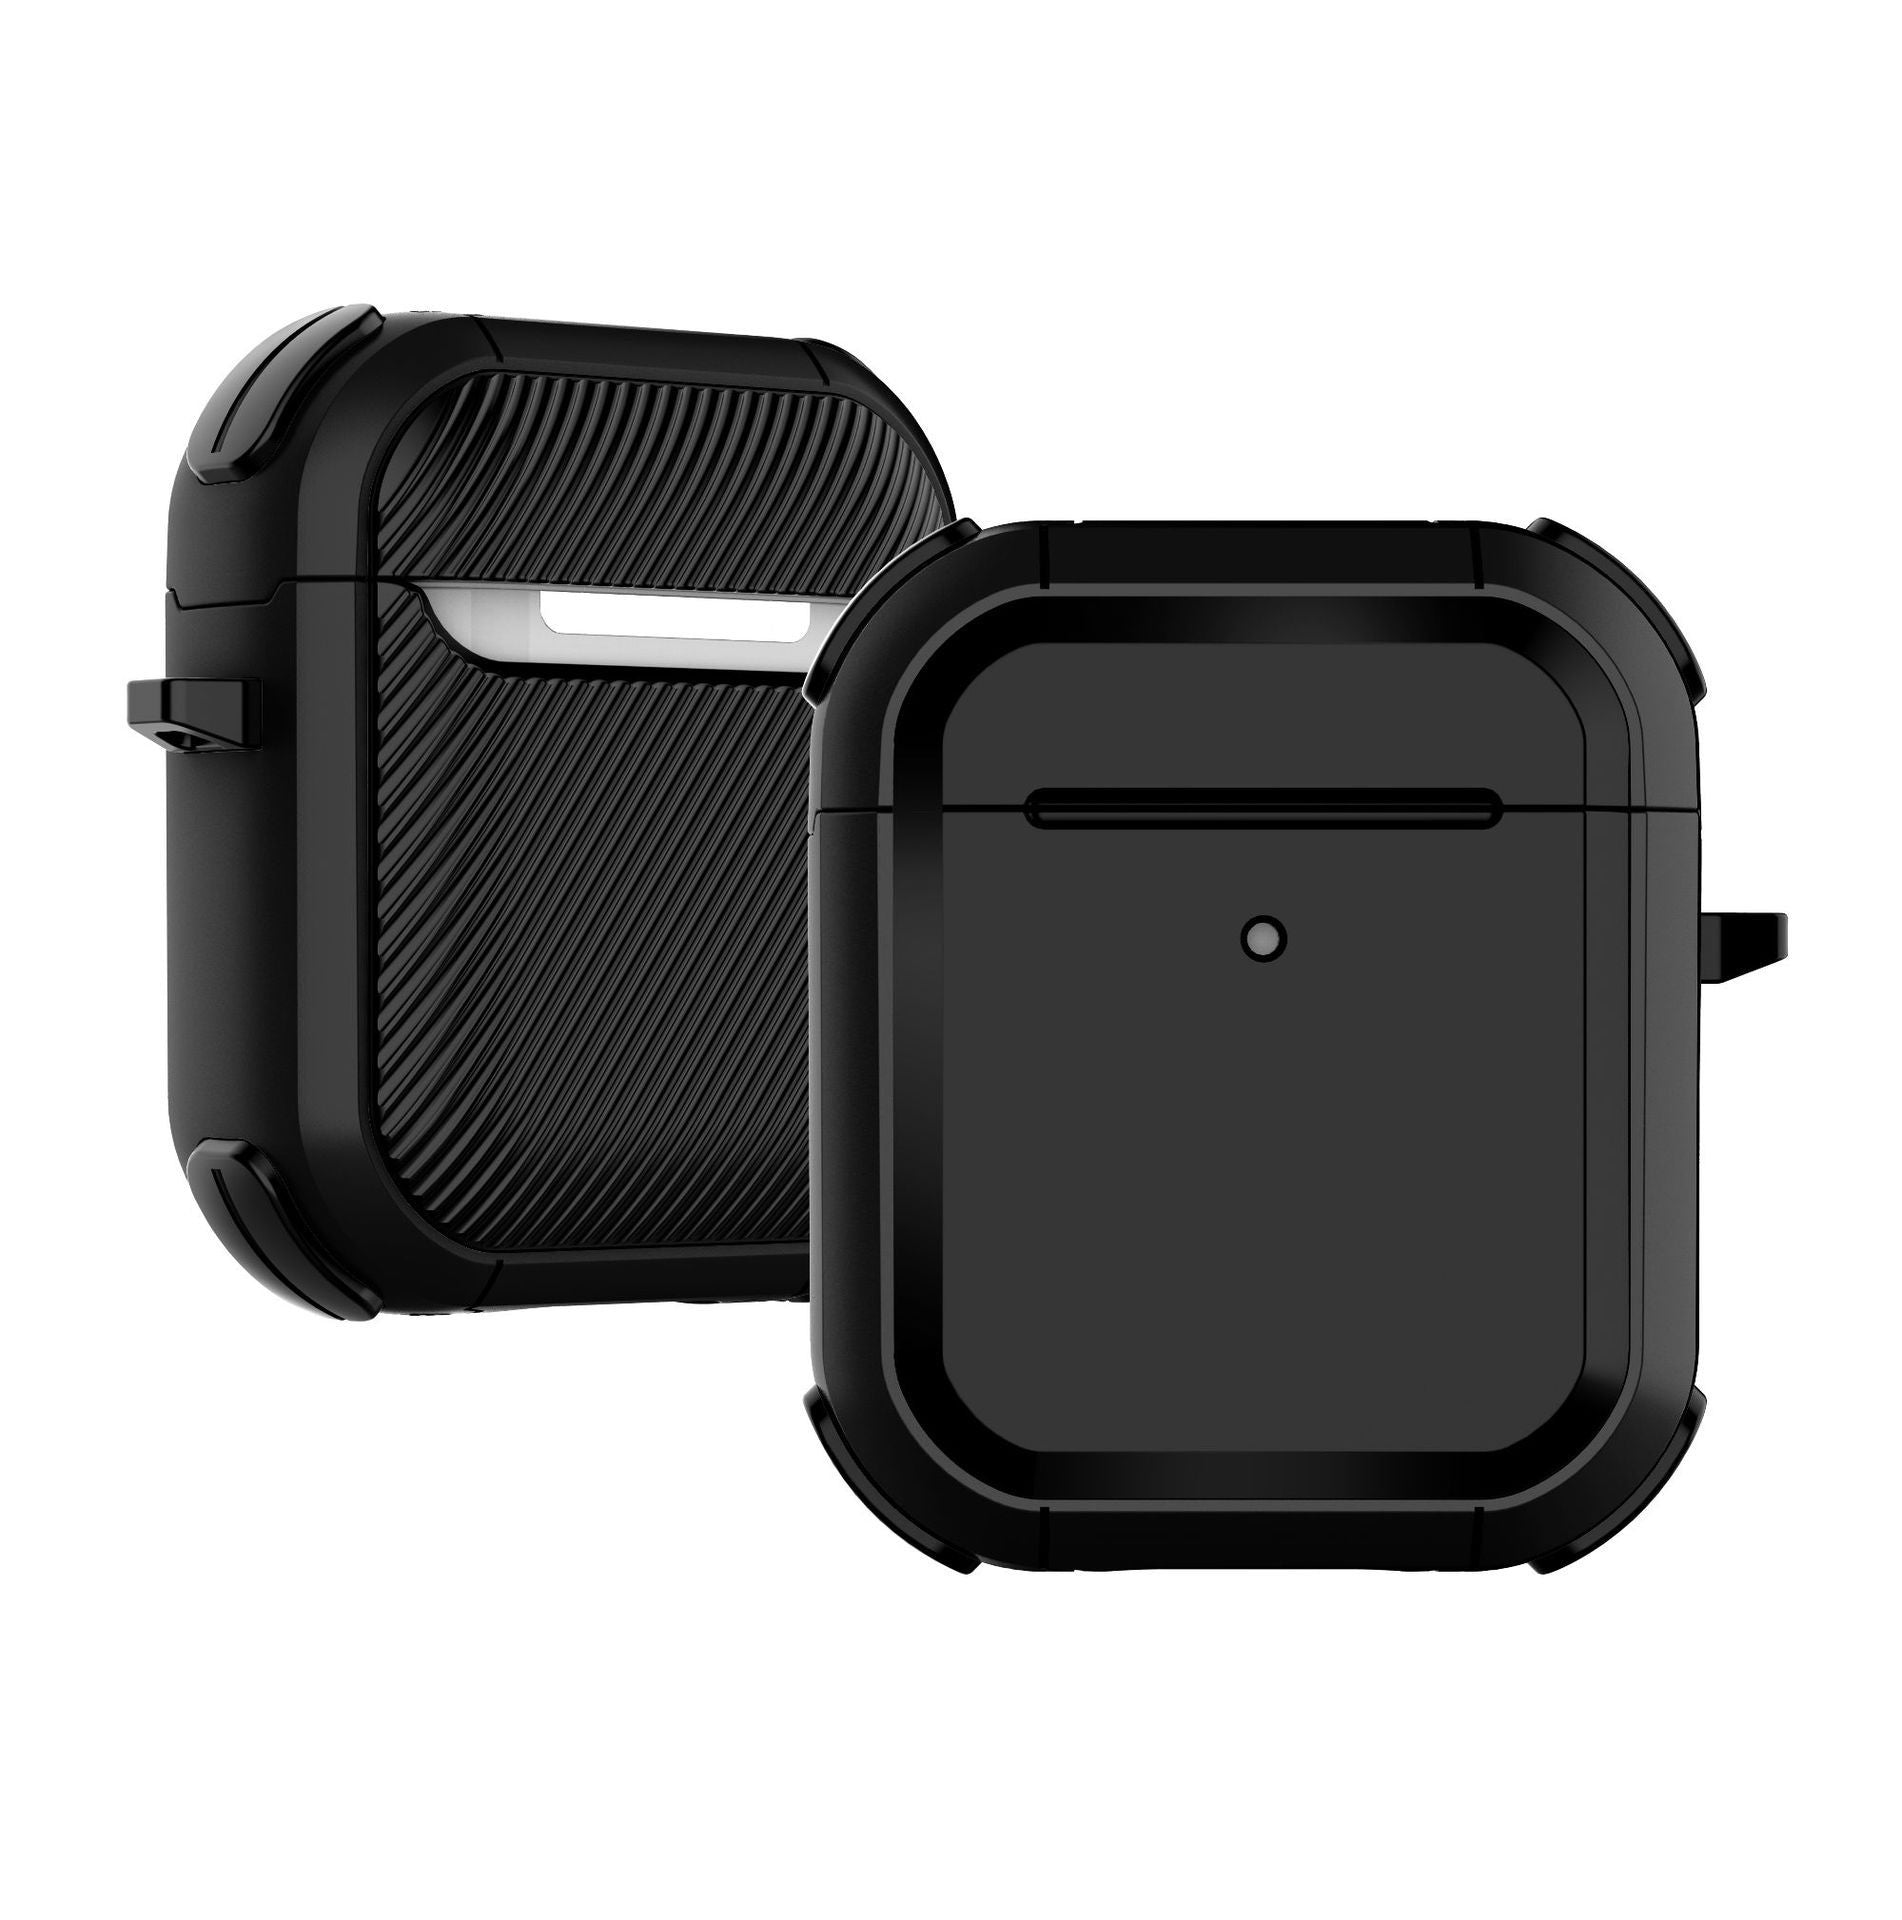 Soft and protective sleeves designed specifically for Airpods, ensuring durability and style - Smart Watch SA